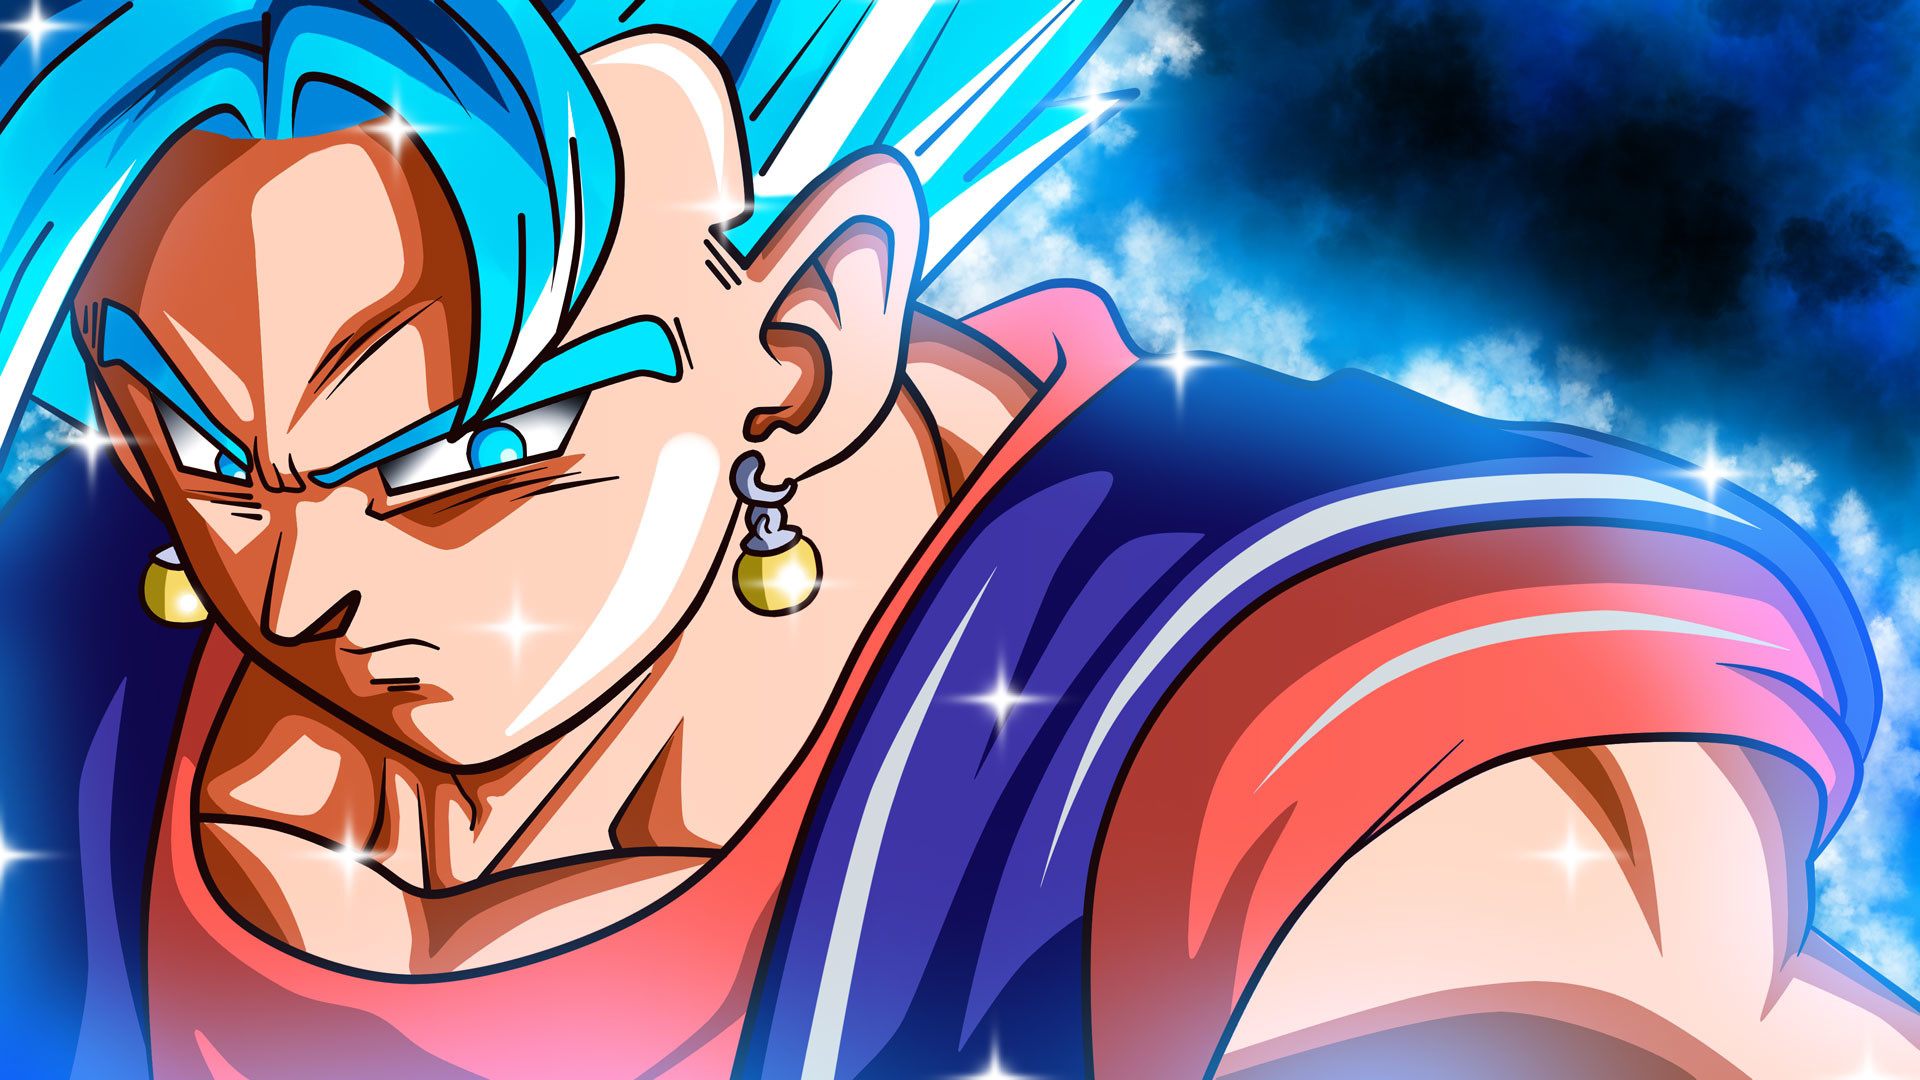 30 Vegito Wallpapers for iPhone and Android by Michael Hamilton